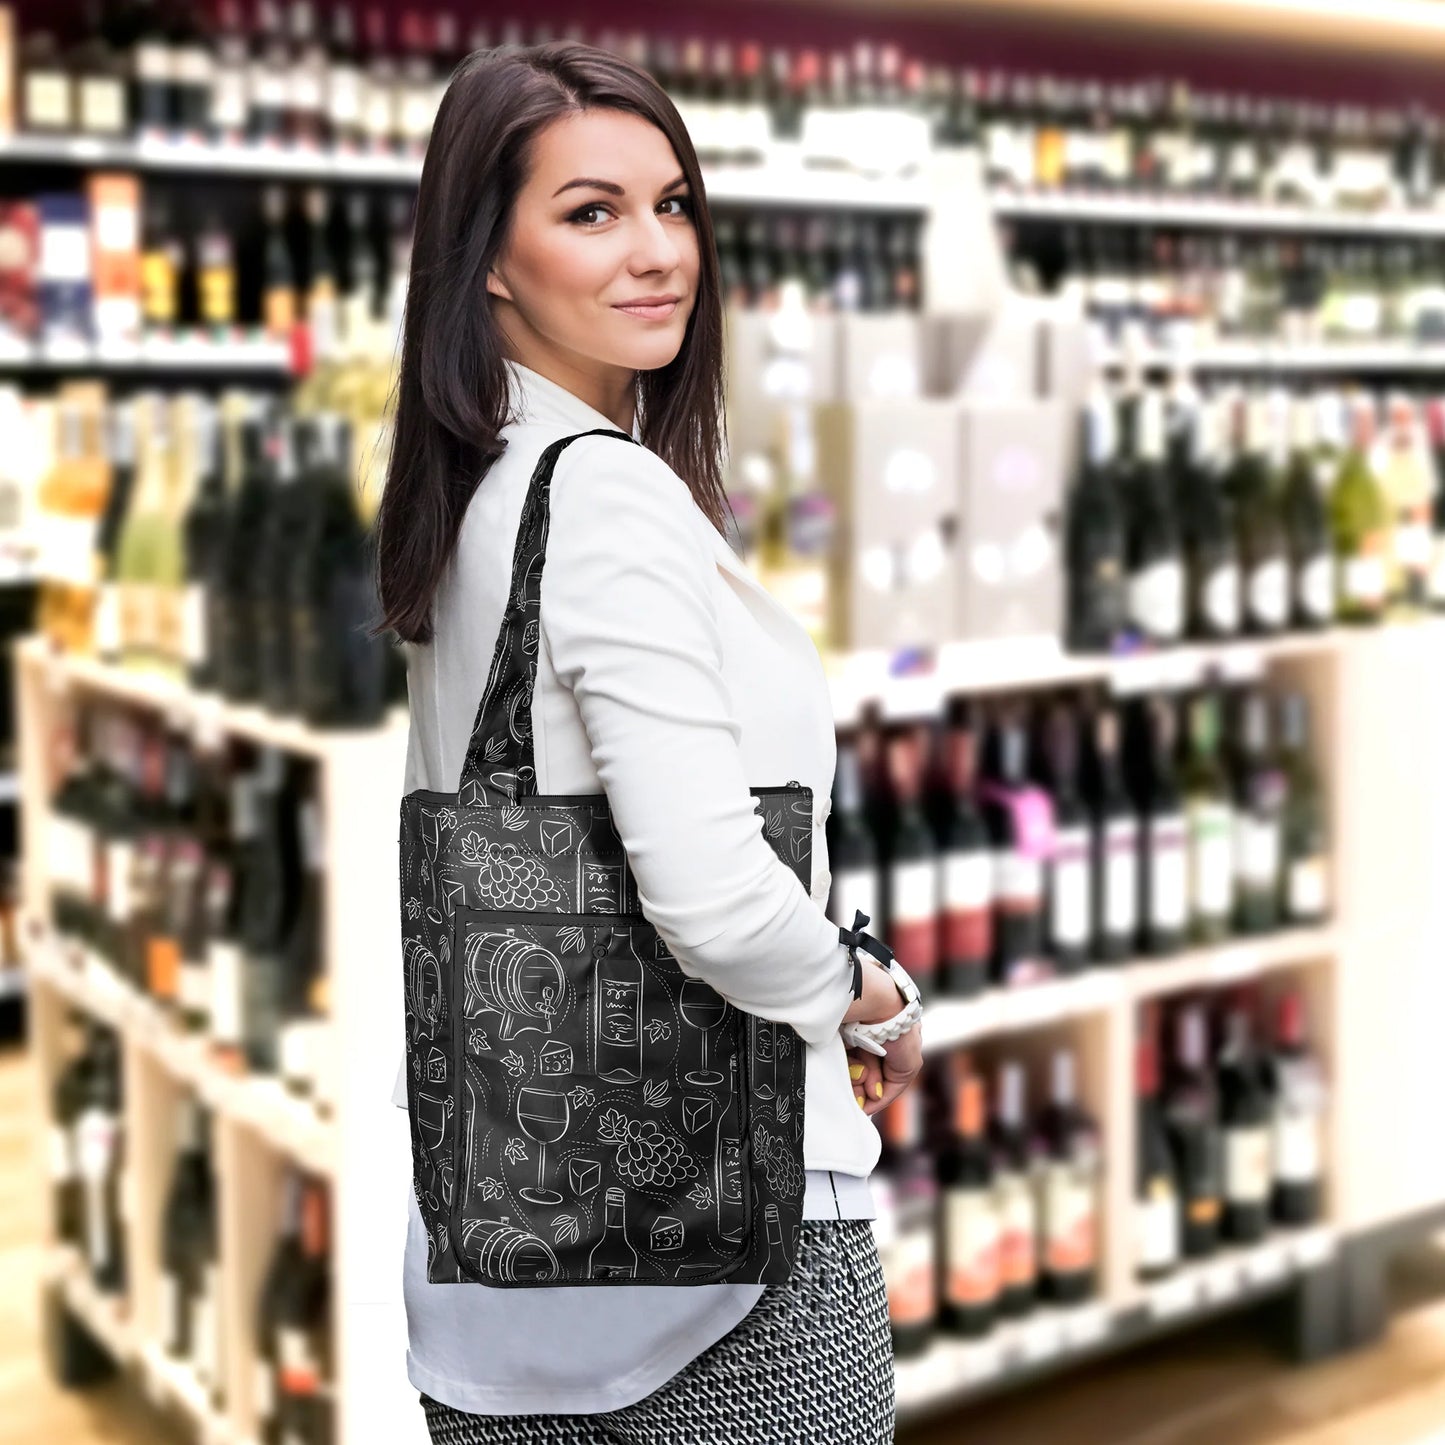 Insulated Bag - The Wine Cask Shopping Tote - Black